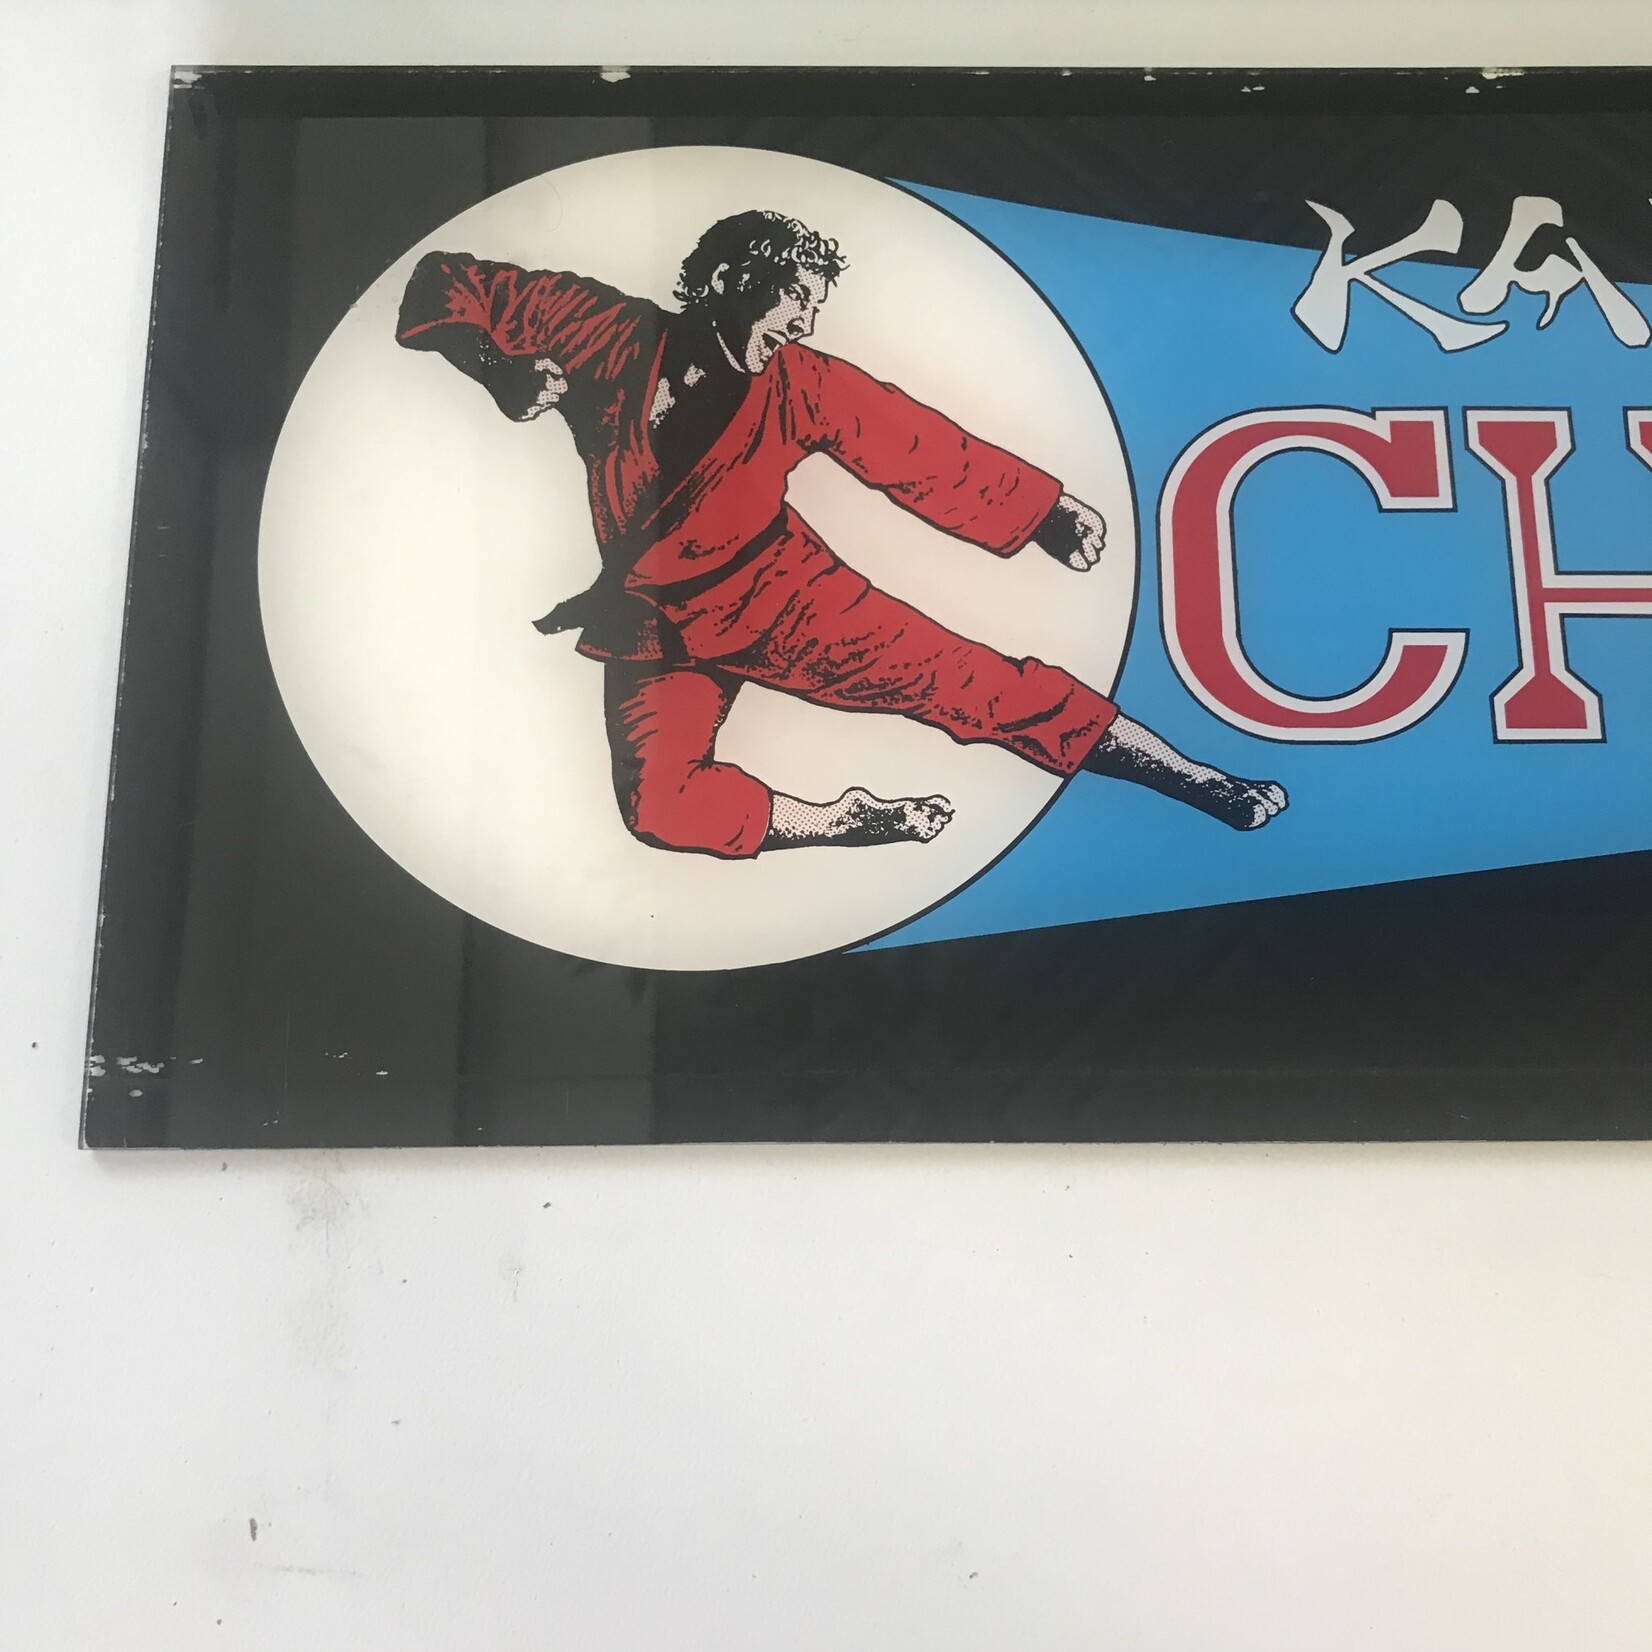 Karate Champ - Arcade Game Marquee (USED)